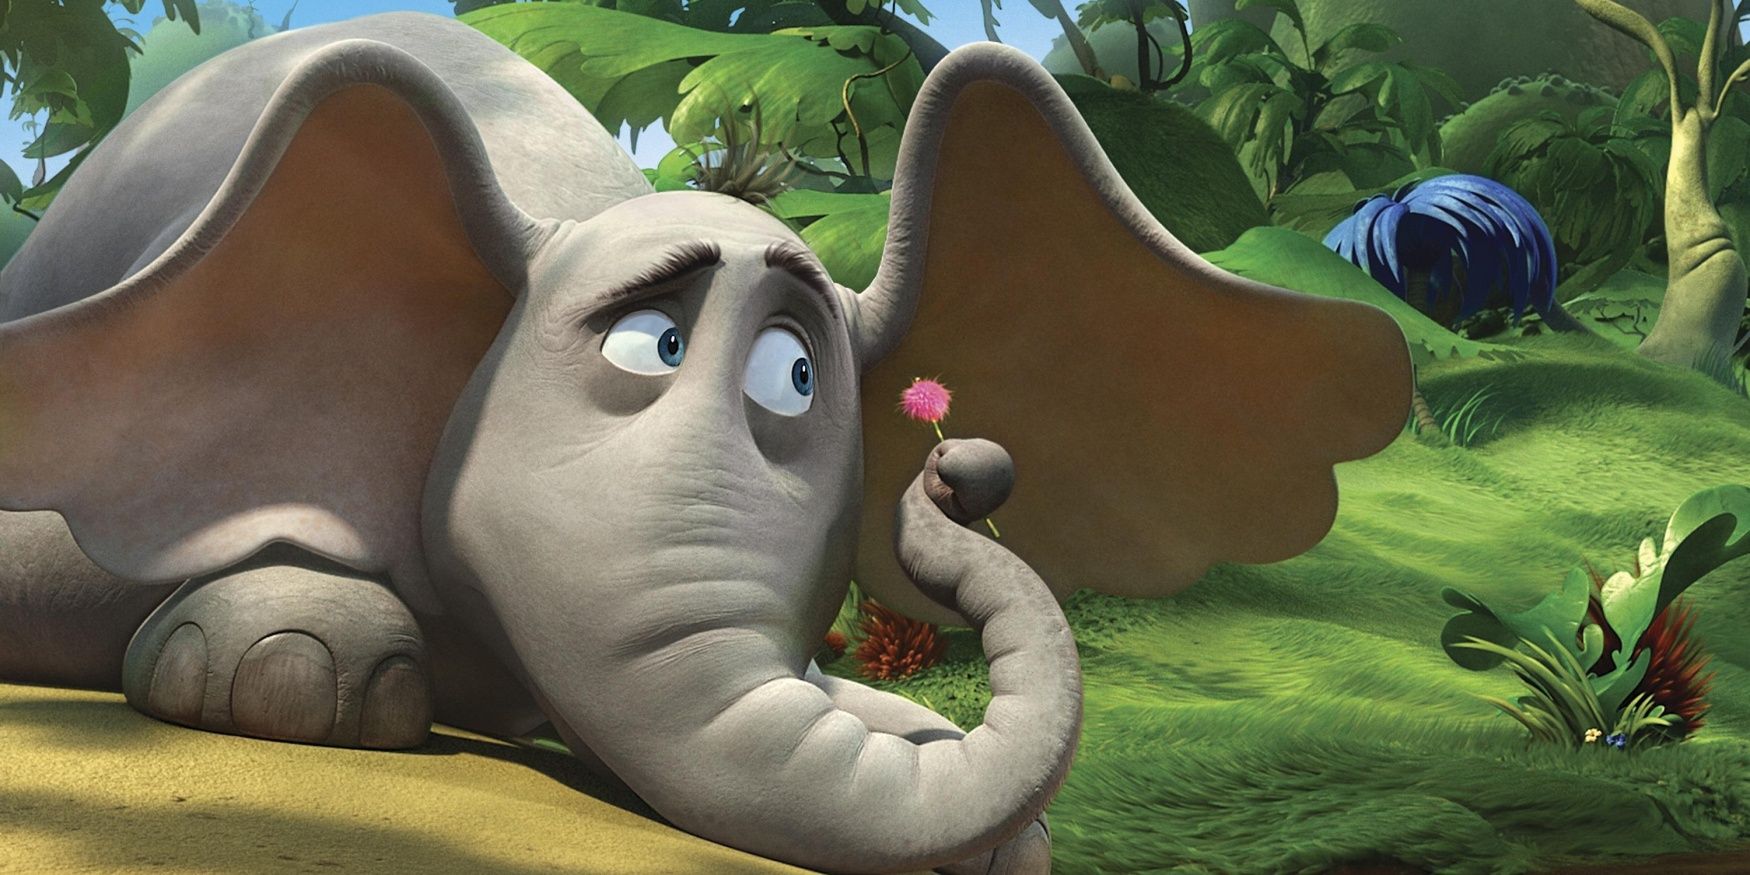 Horton the elephant looking closely at a flower in Horton Hears a Who!